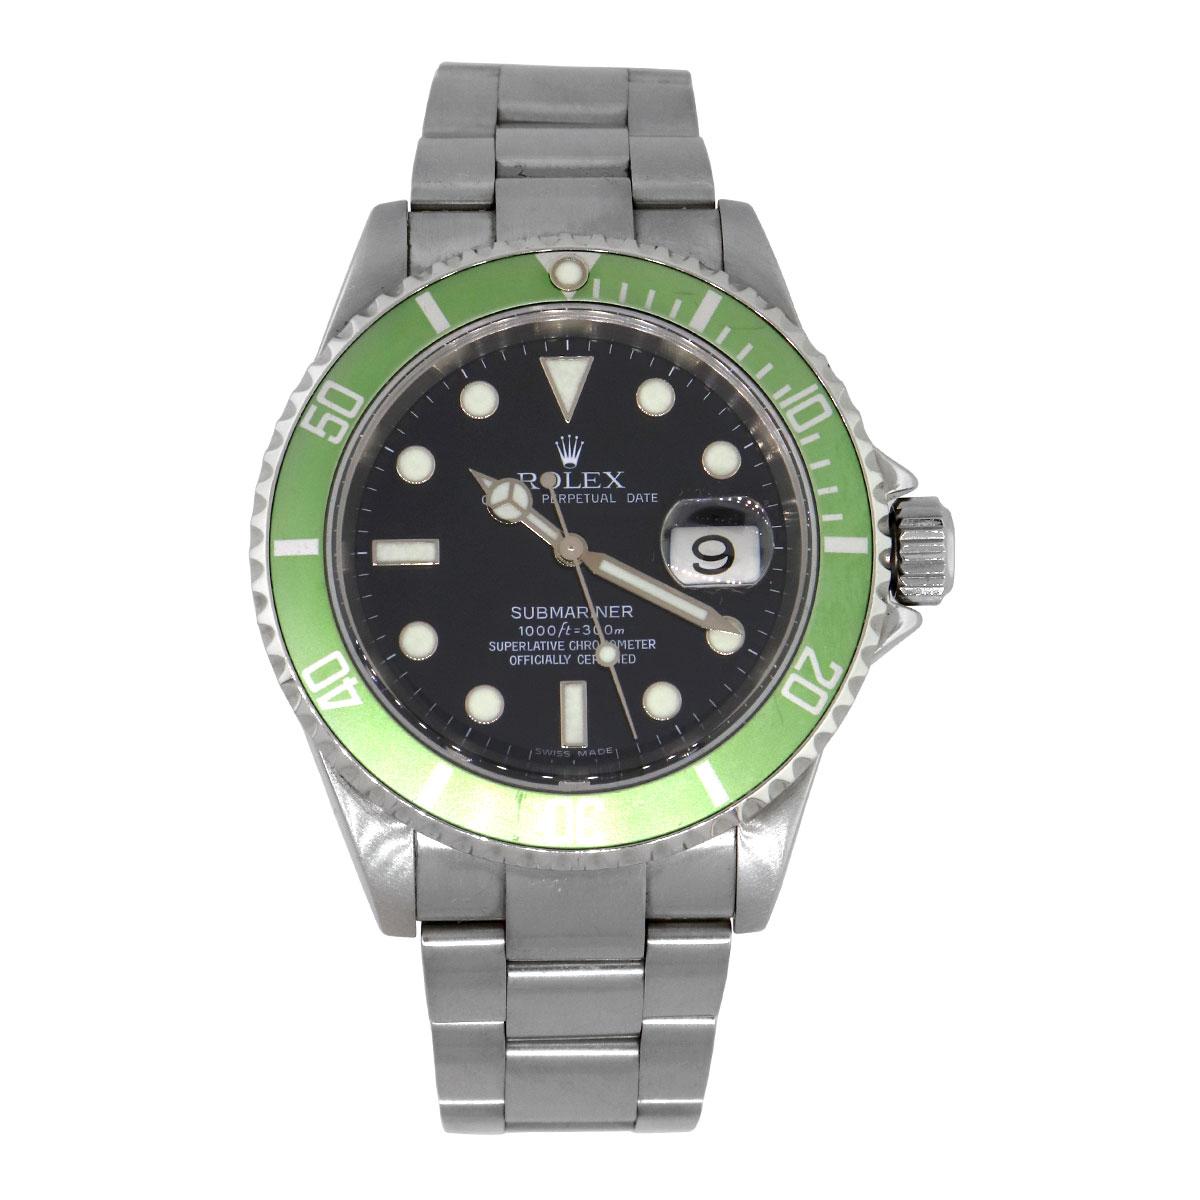 Brand: Rolex
MPN: 16610
Model: Submariner
Case Material: Stainless Steel
Case Diameter: 40mm
Crystal: Sapphire crystal
Bezel: Unidirectional green 